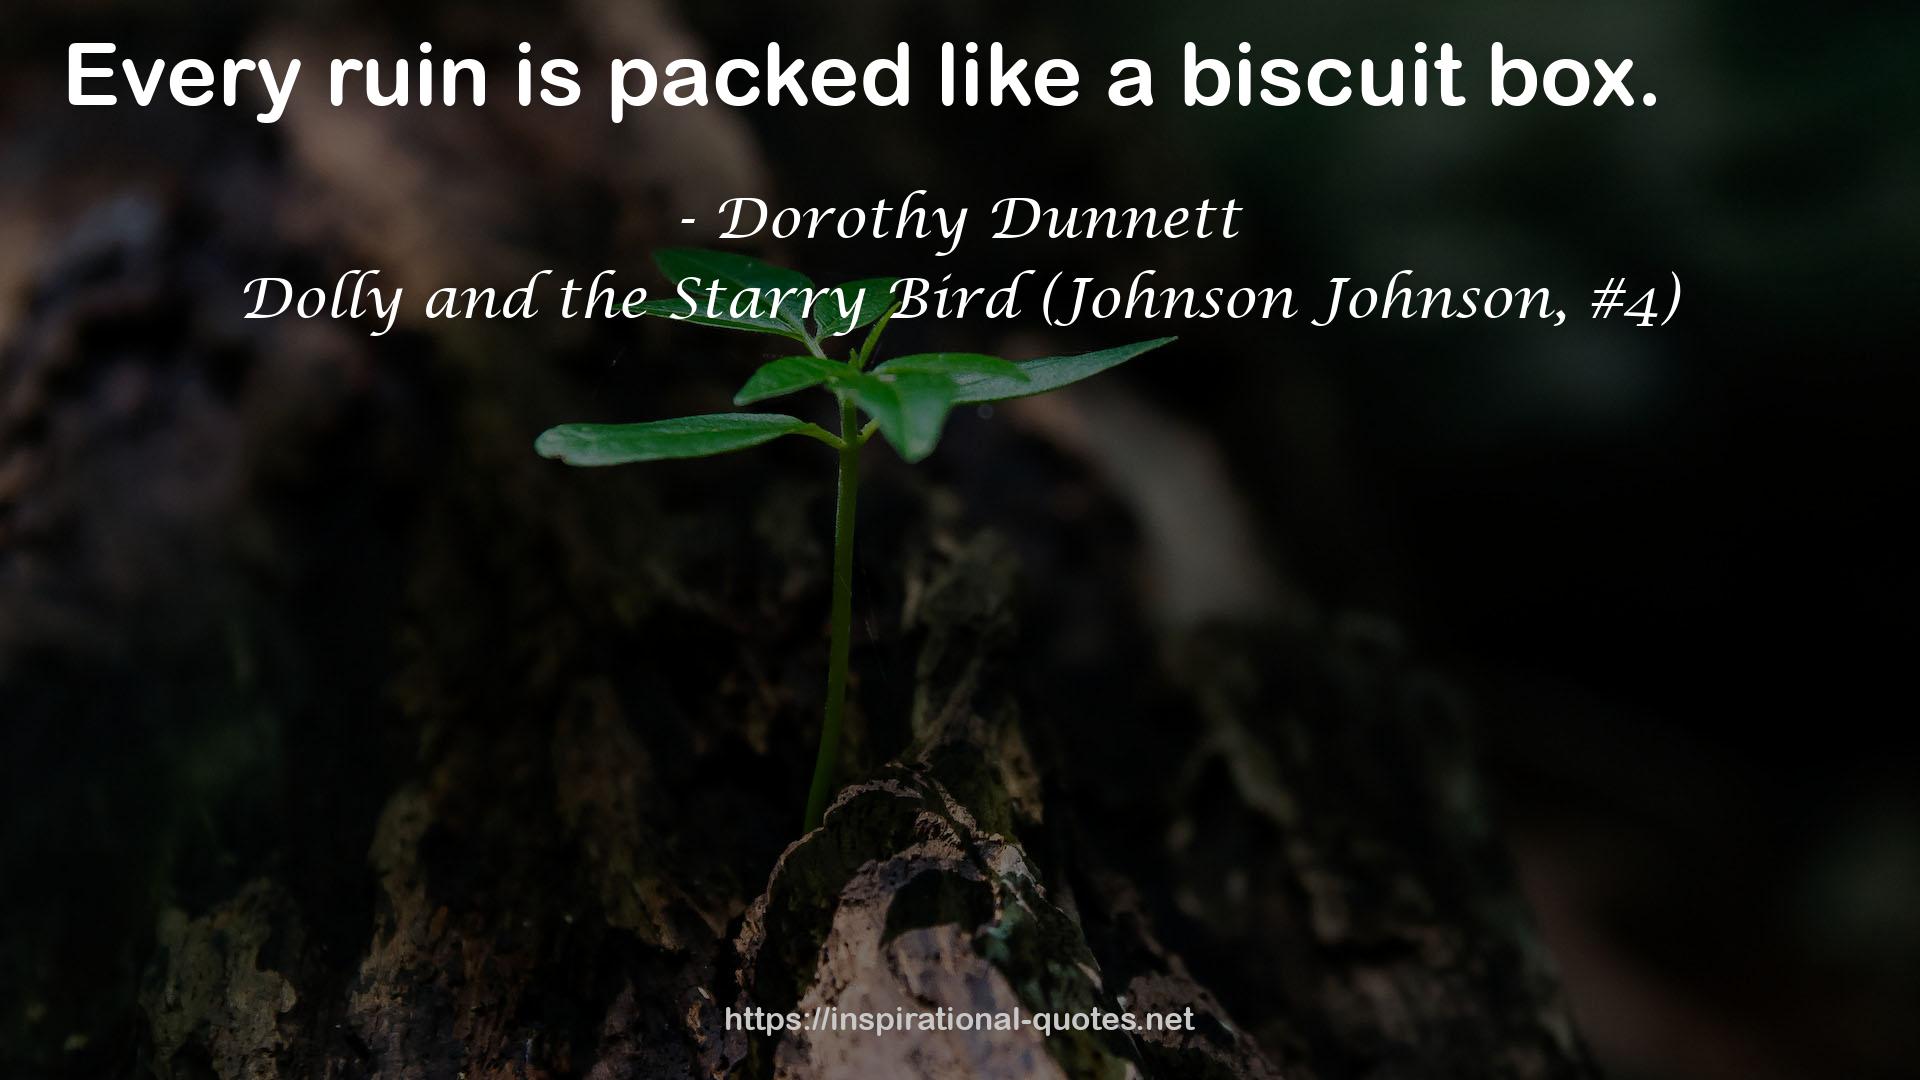 Dolly and the Starry Bird (Johnson Johnson, #4) QUOTES